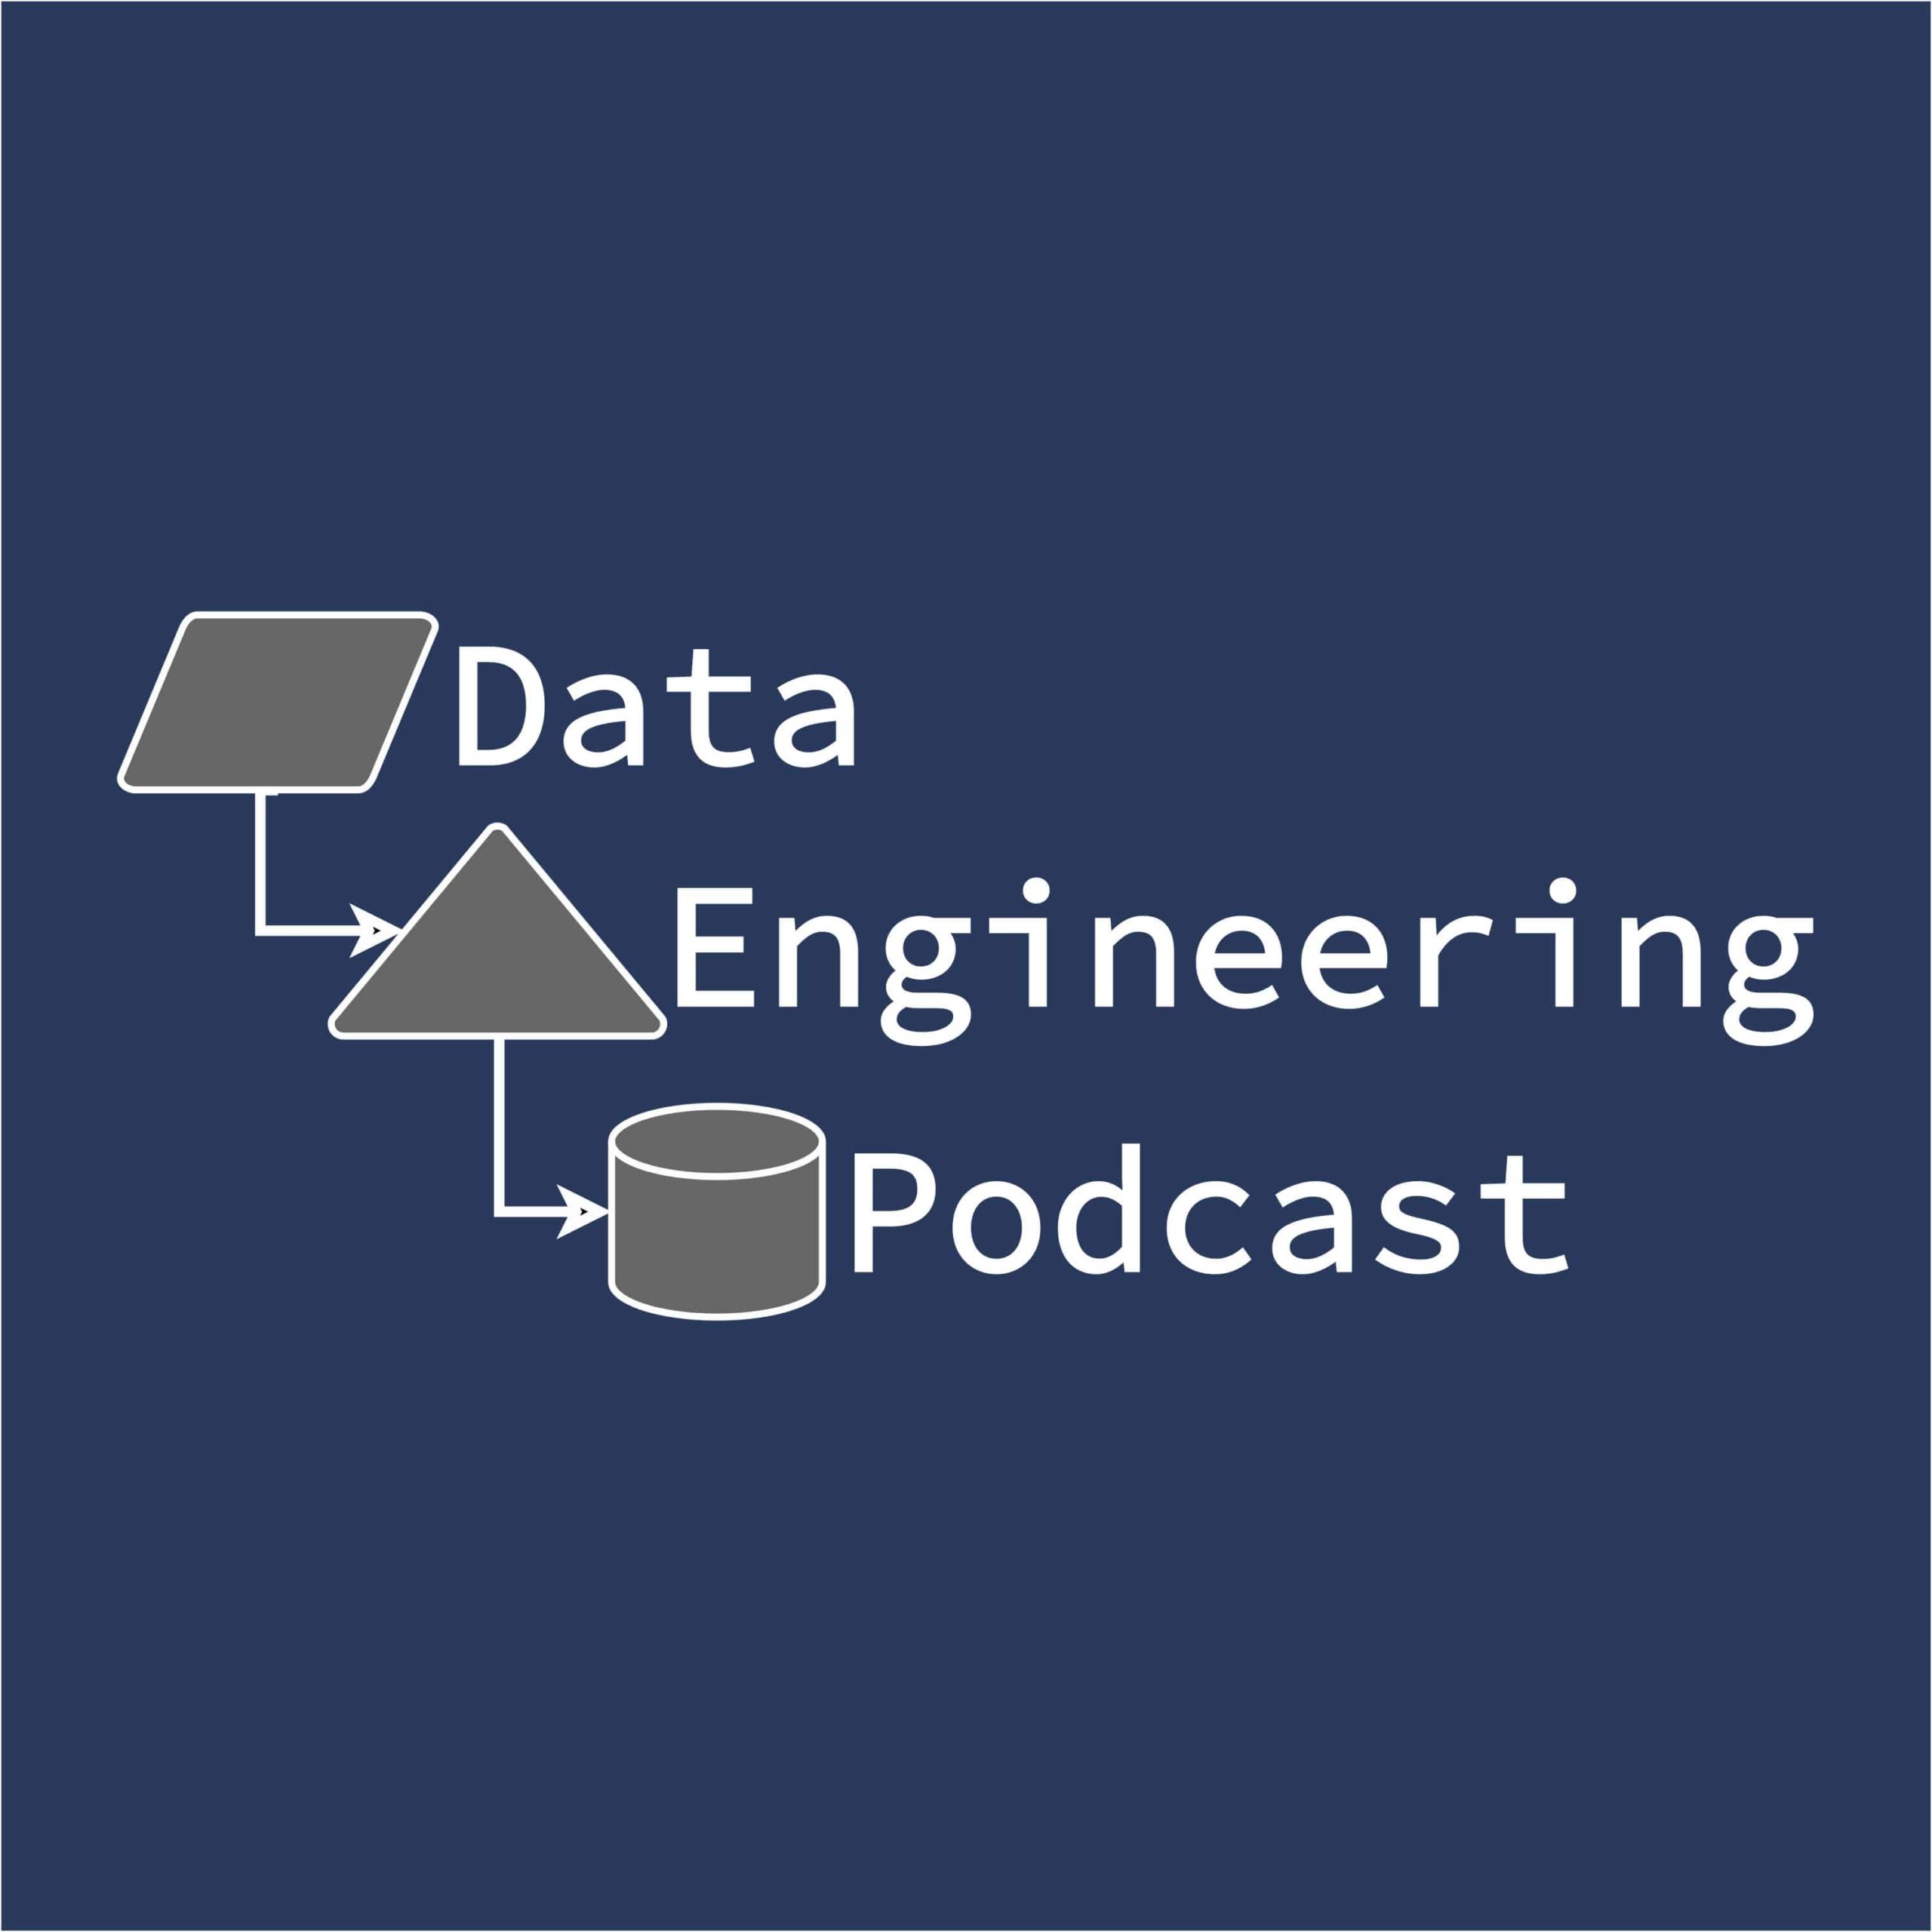 The Data Engineering Podcast